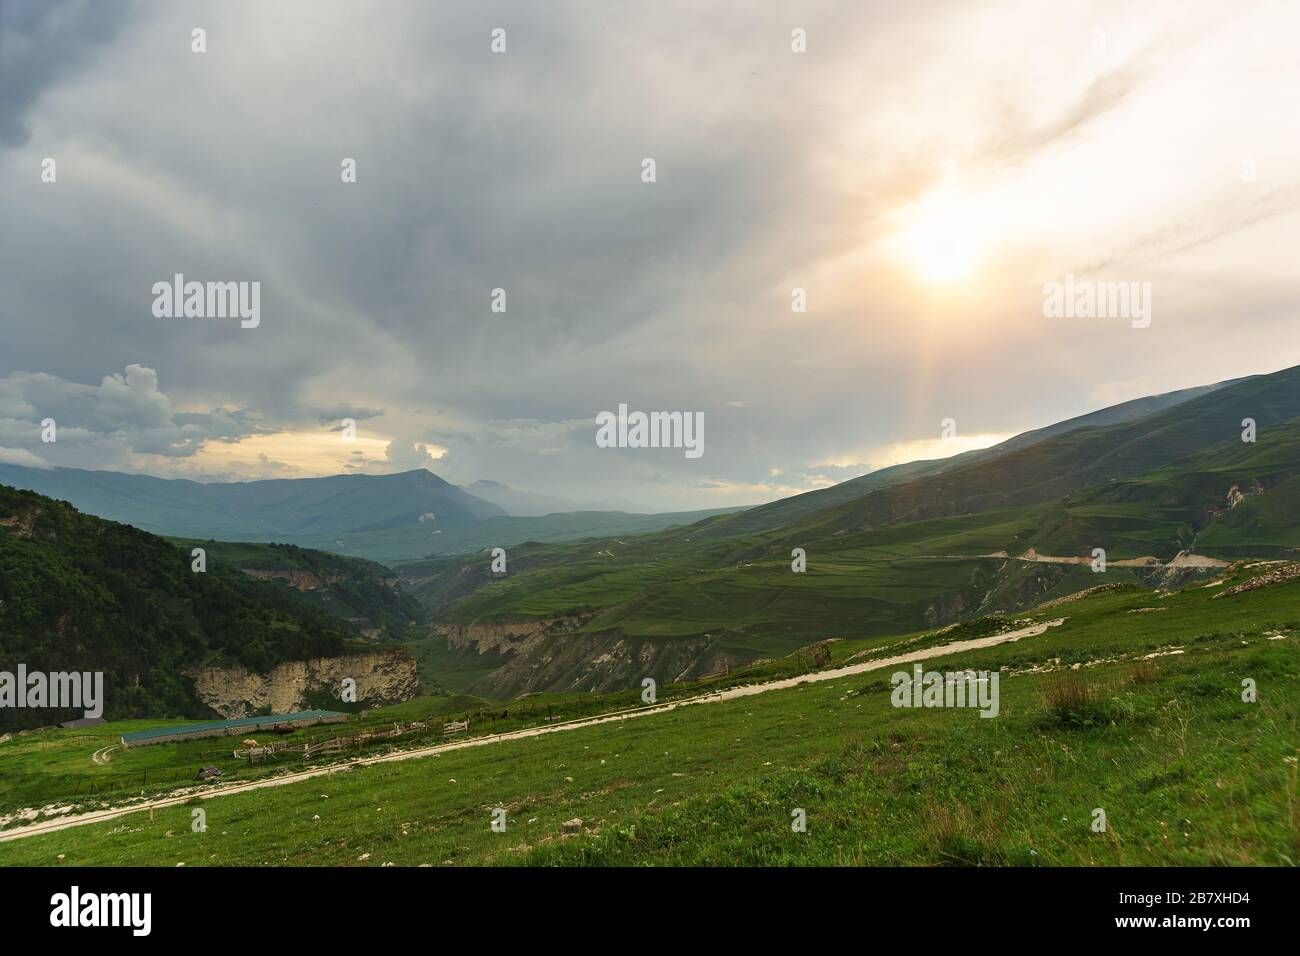 River gorge Okete in the Vedeno district of the Chechen Republic. Picturesque mountain landscape at the sunset of a cloudy day Stock Photo